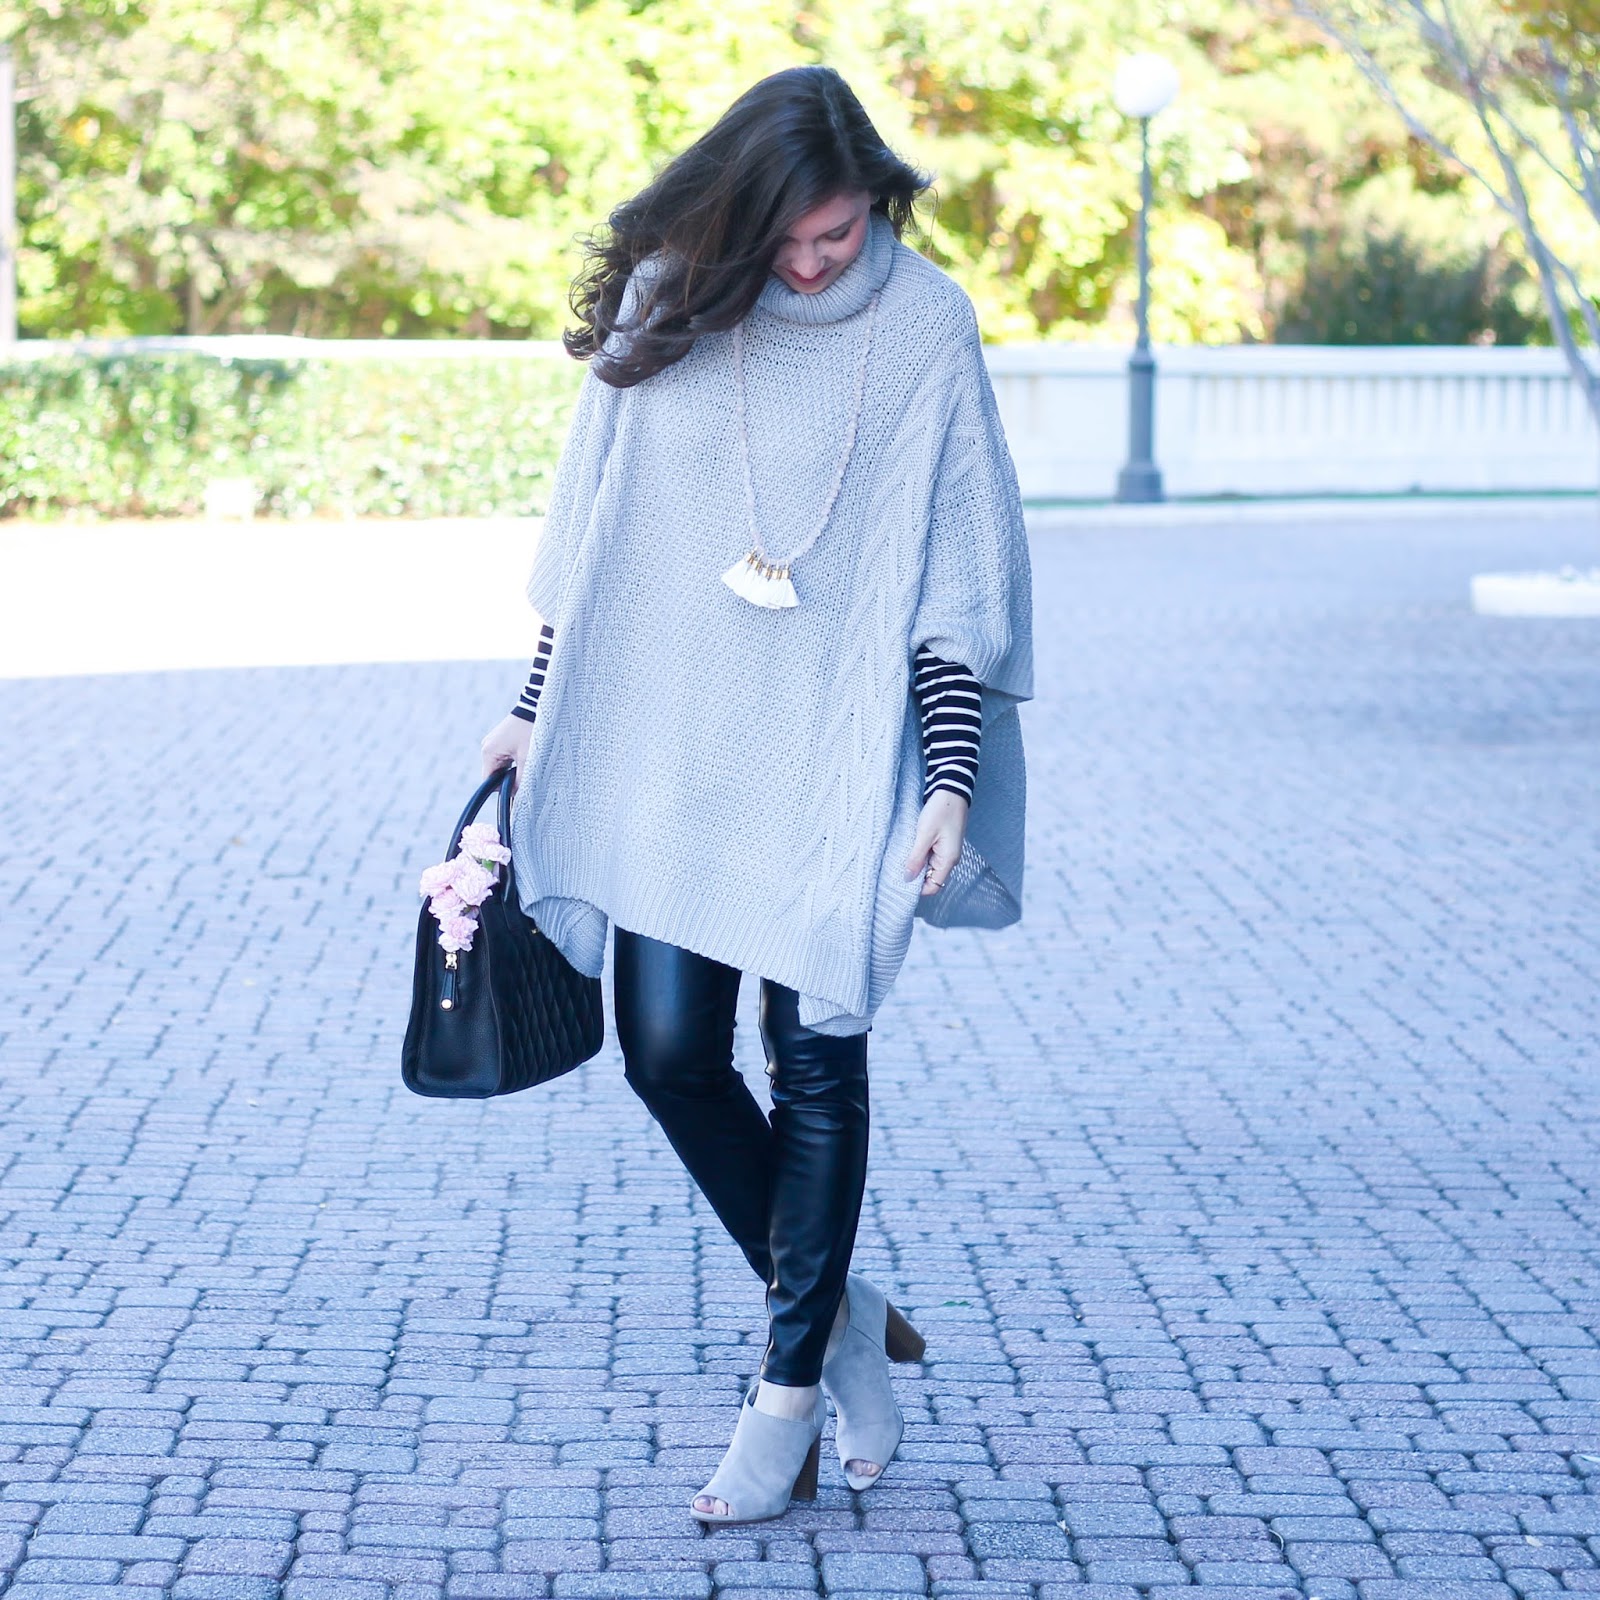 Grey Turtleneck Poncho, SheIn poncho, striped turtleneck with poncho, j crew striped turtleneck, fall outfit, fall style, fall trends, Sylvia Benson tassel necklace, Sylvia Benson jewelry, faux leather leggings, Vera Bradley quilted satchel, grey suede open toe booties, fall layers, pretty in the pines blog, pretty in the pines